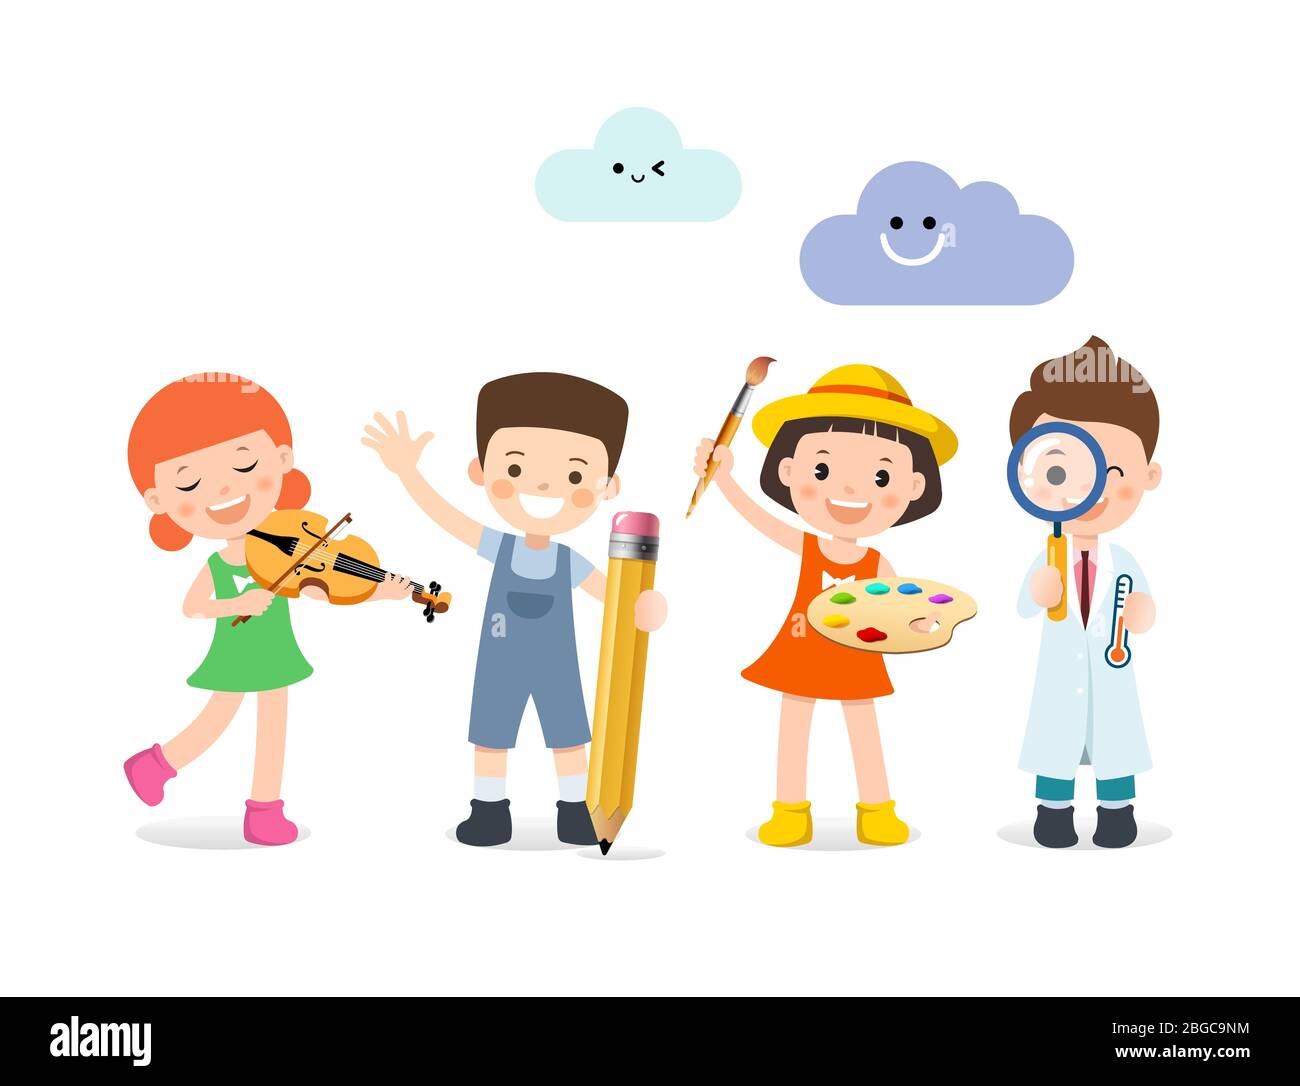 People who want to be children are musicians, scholars, painters, and scientists. Stock Vector